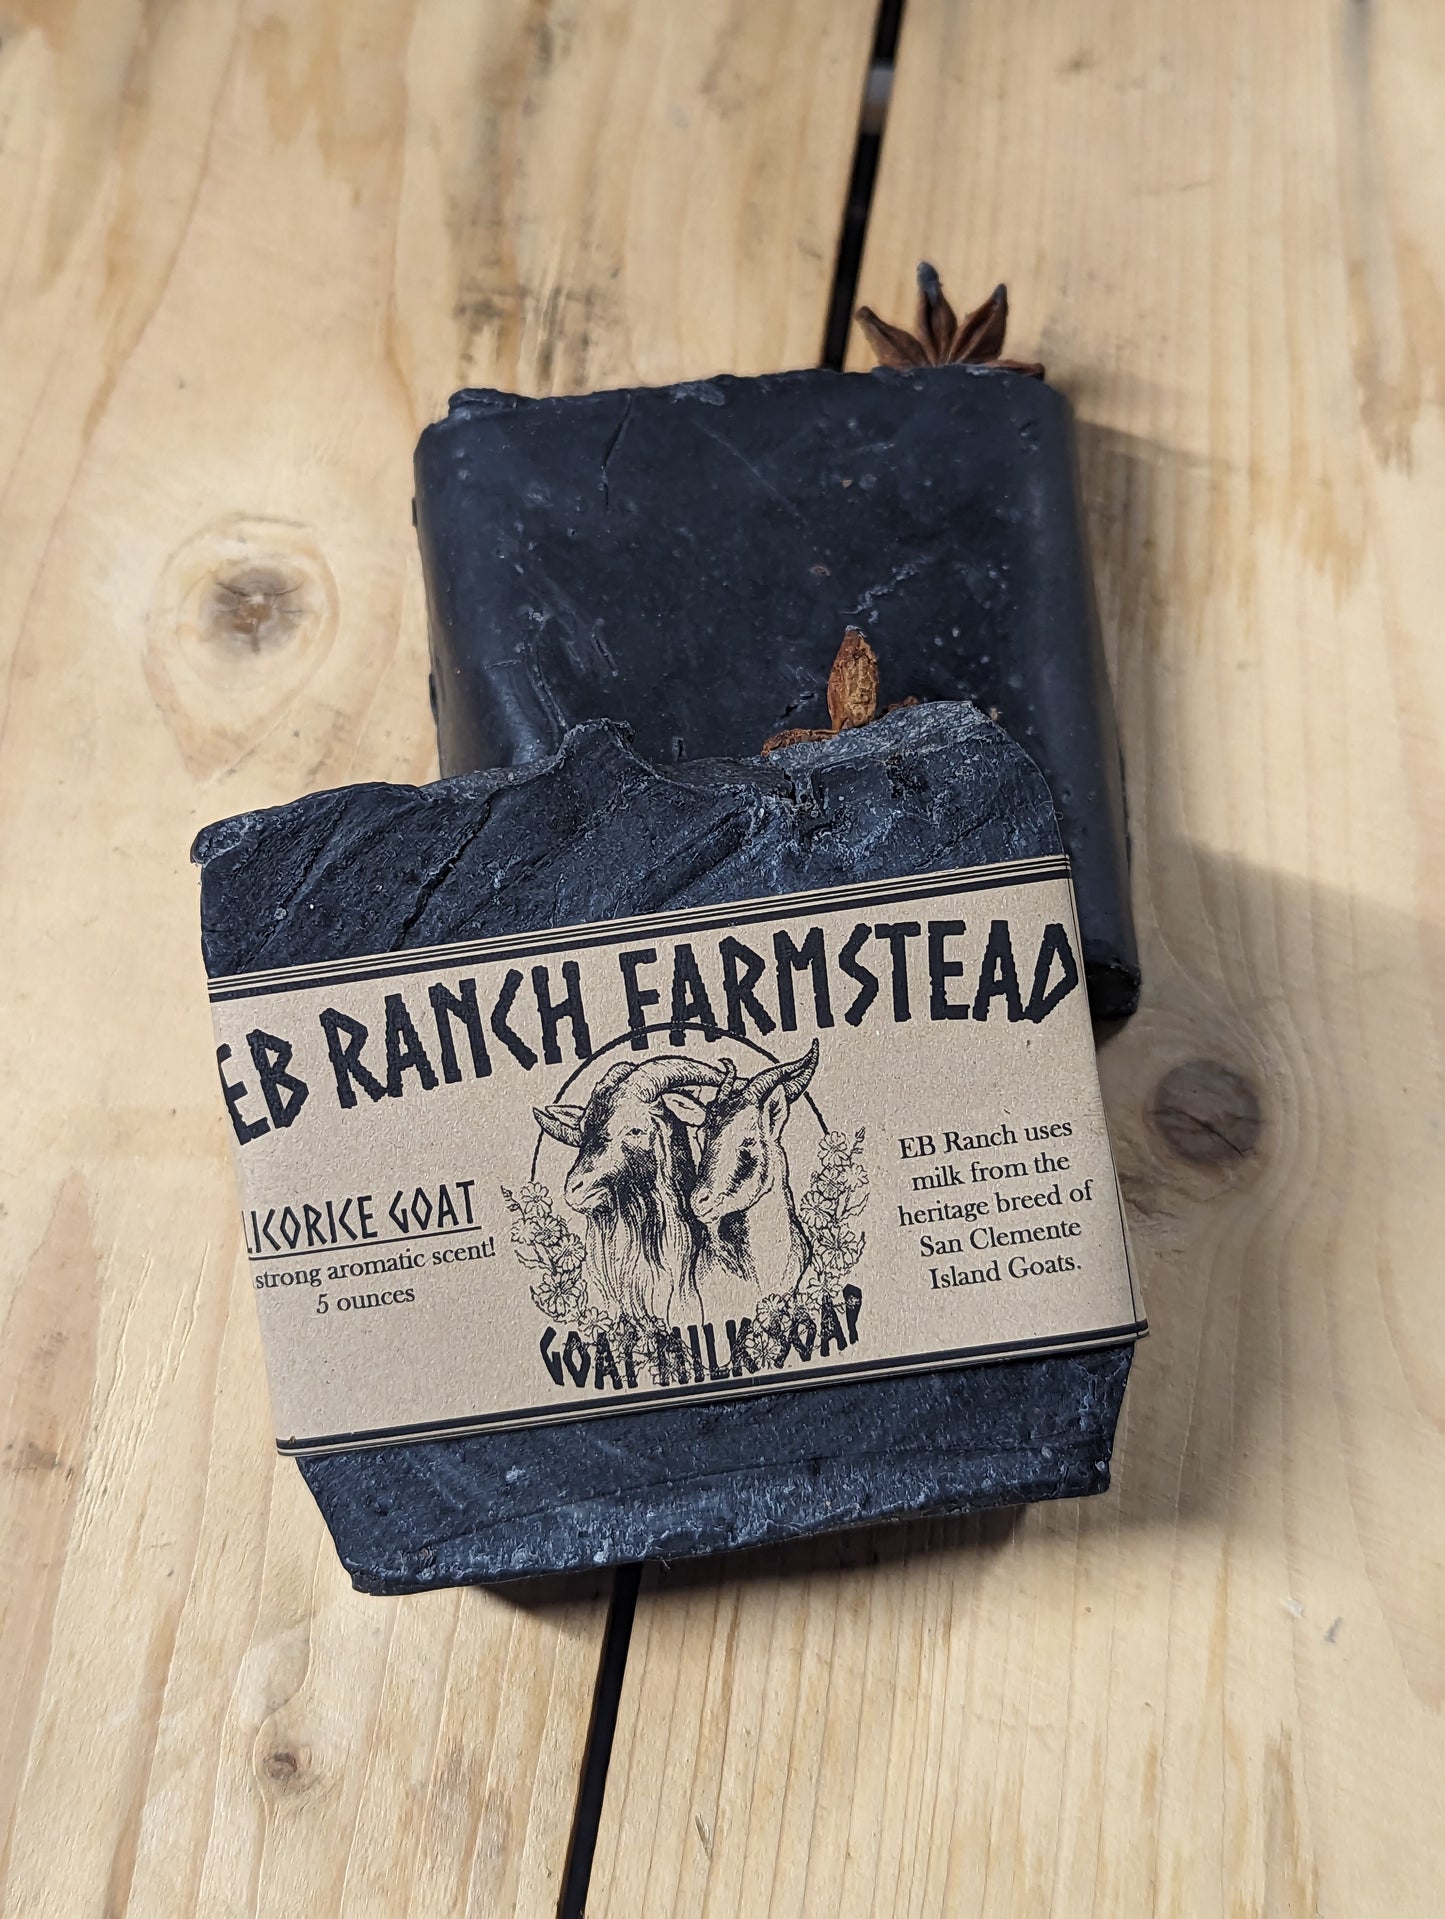 Bar of Wild Haven Farm's Licorice goat milk soap made with San Clemente Island goat milk